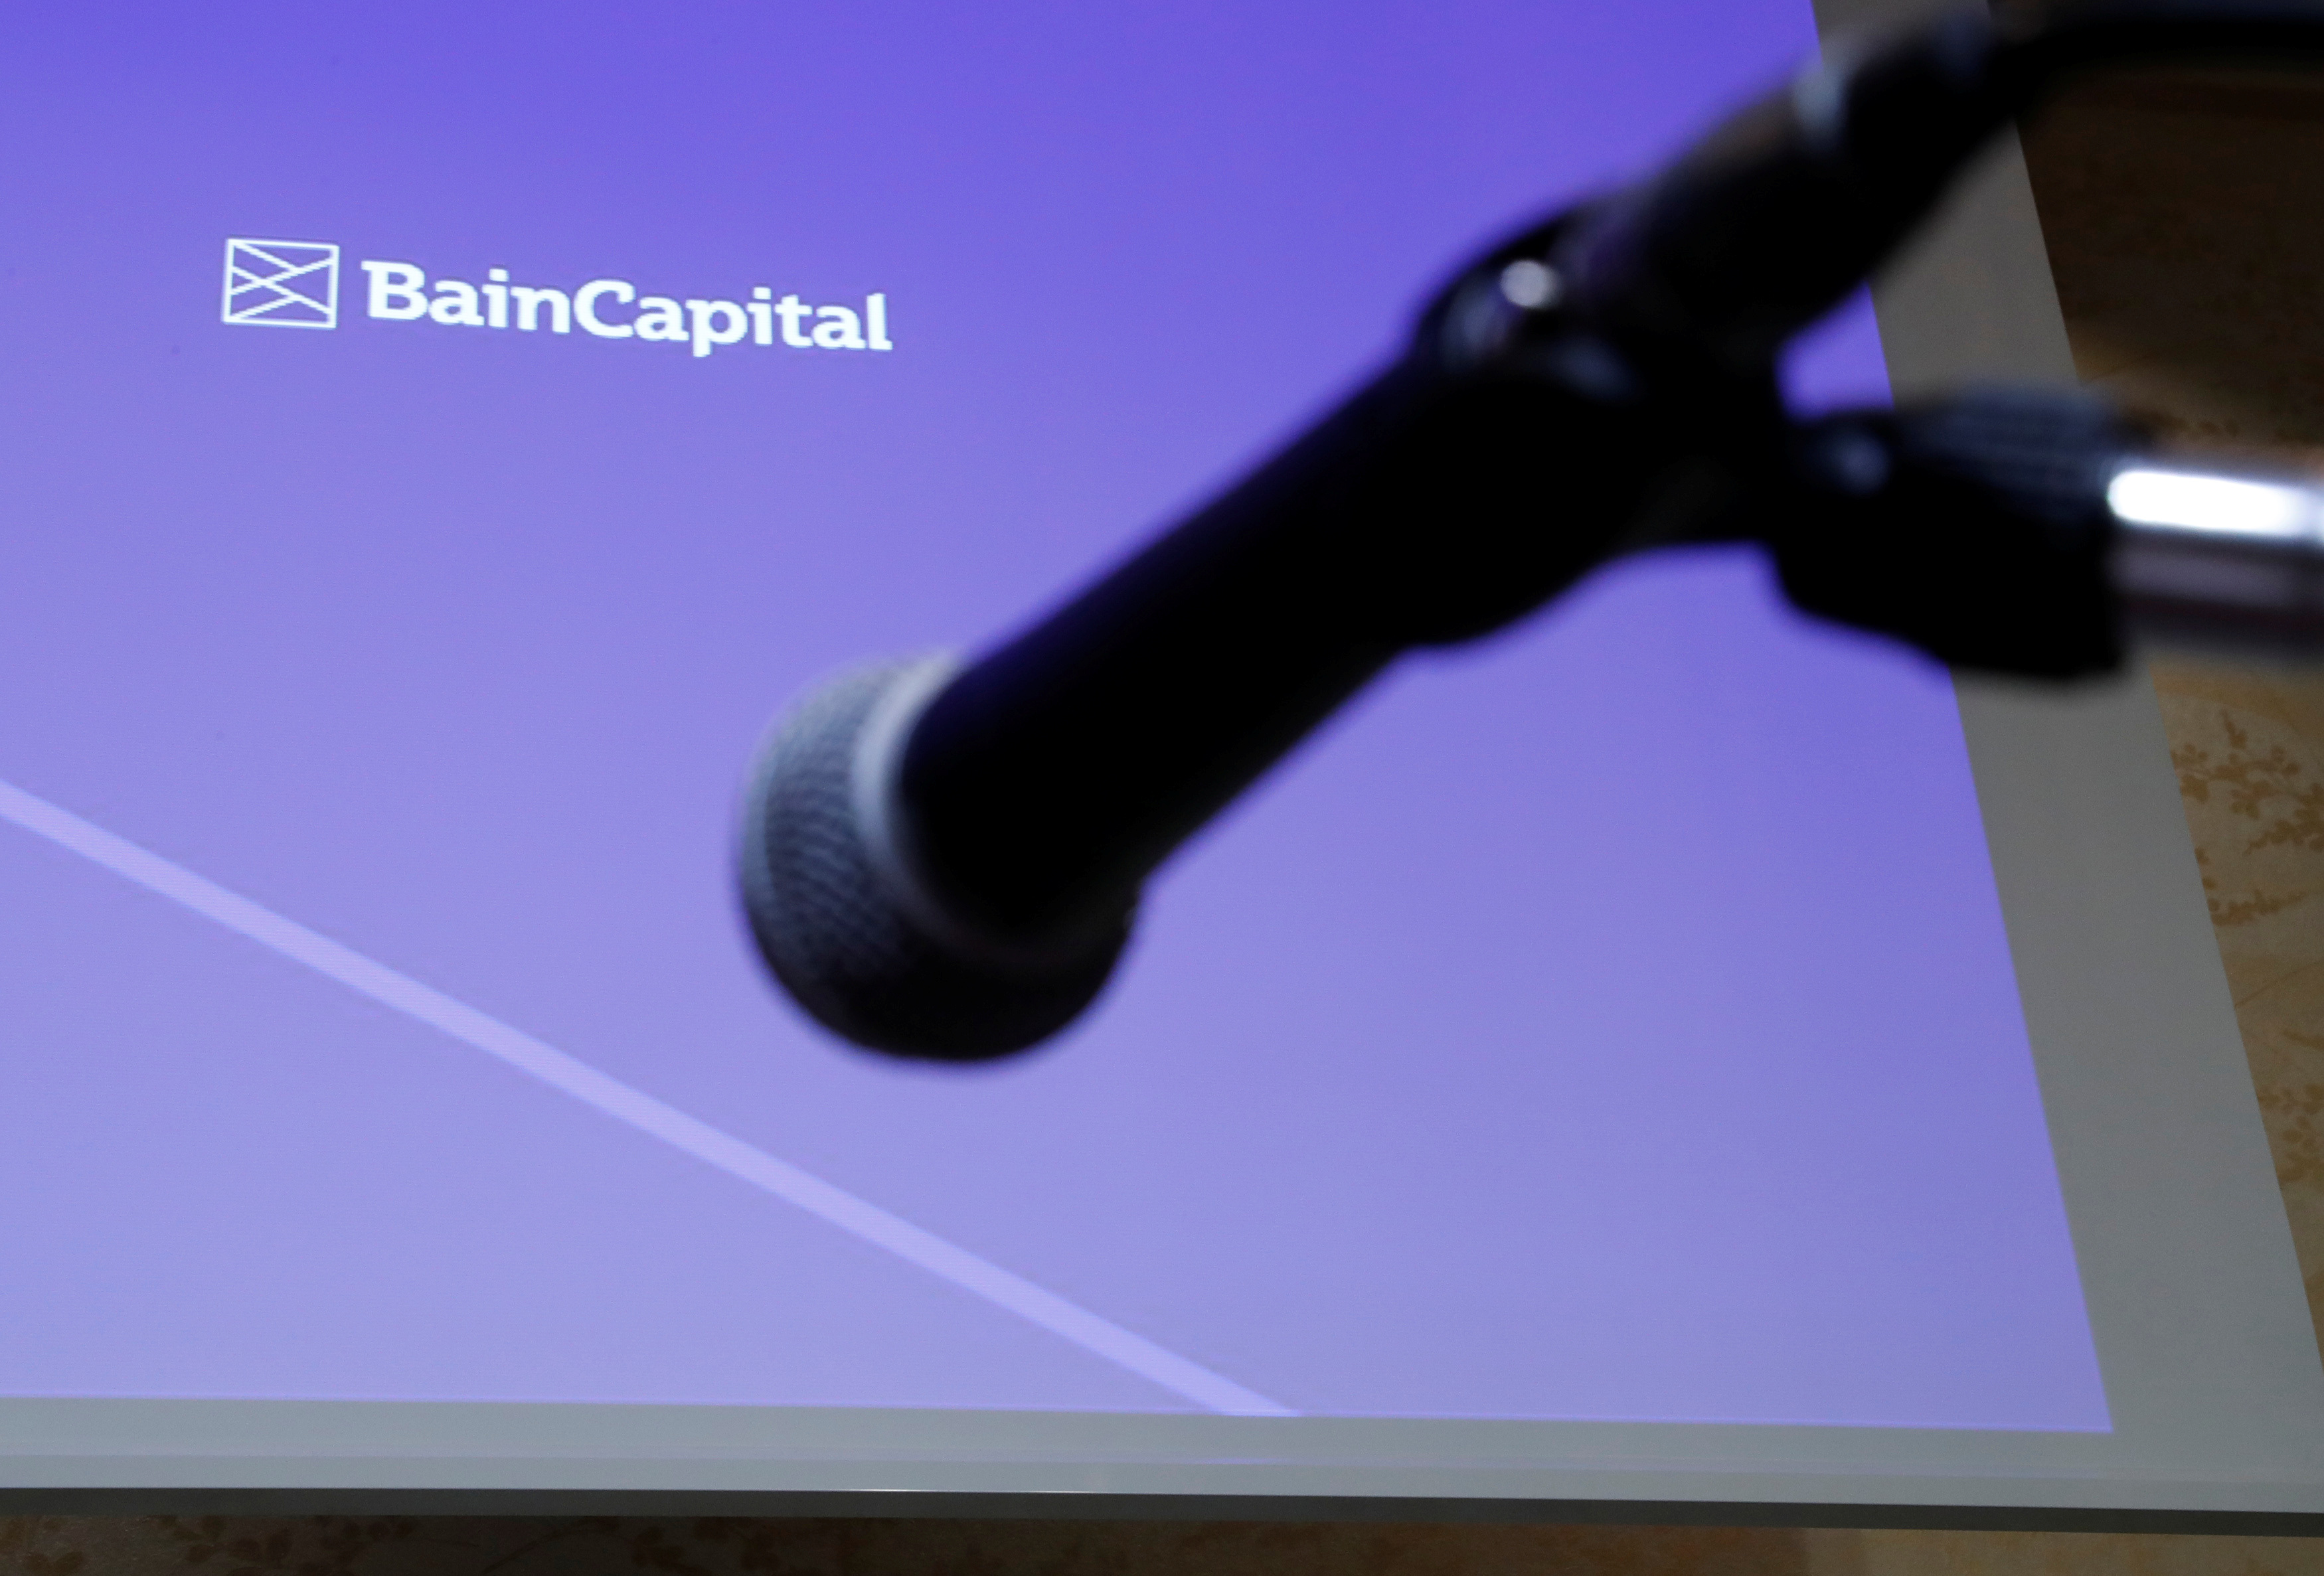 Logo of the Bain Capital is screened at a news conference in Tokyo